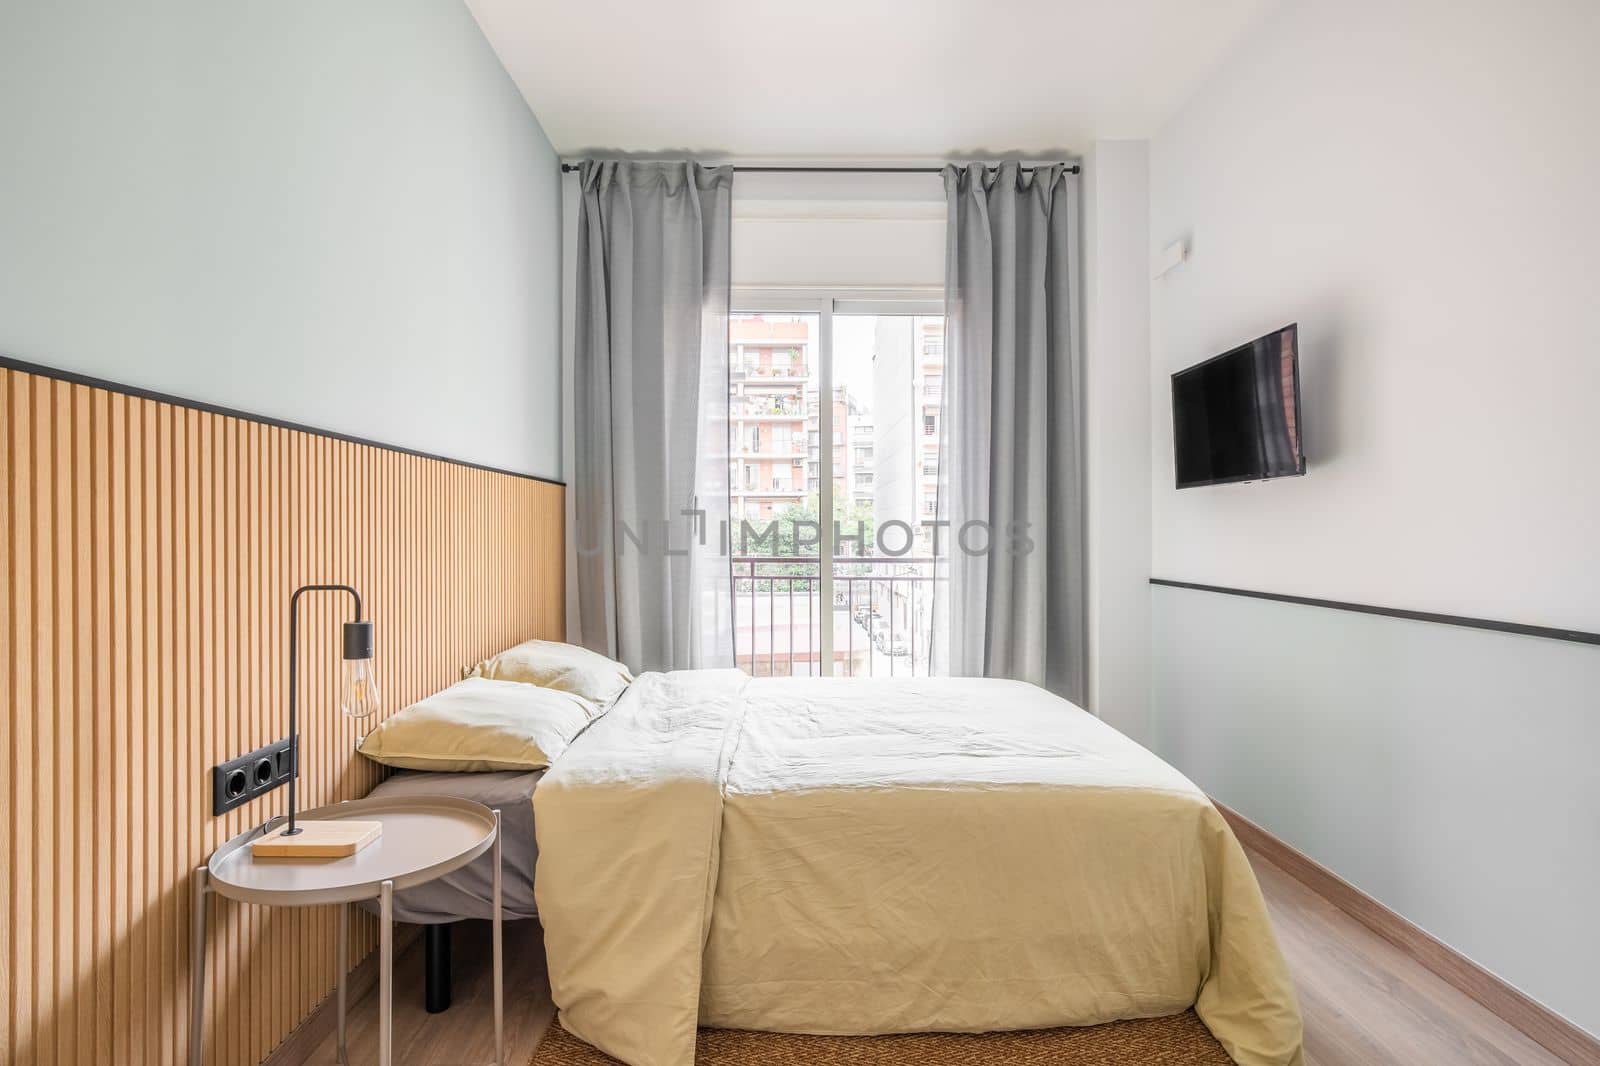 Bedroom with large bed for two persons against backdrop of glass sliding door with access to small balcony. Curtains on door protect from bright sun during day. On wall is TV for watching movies